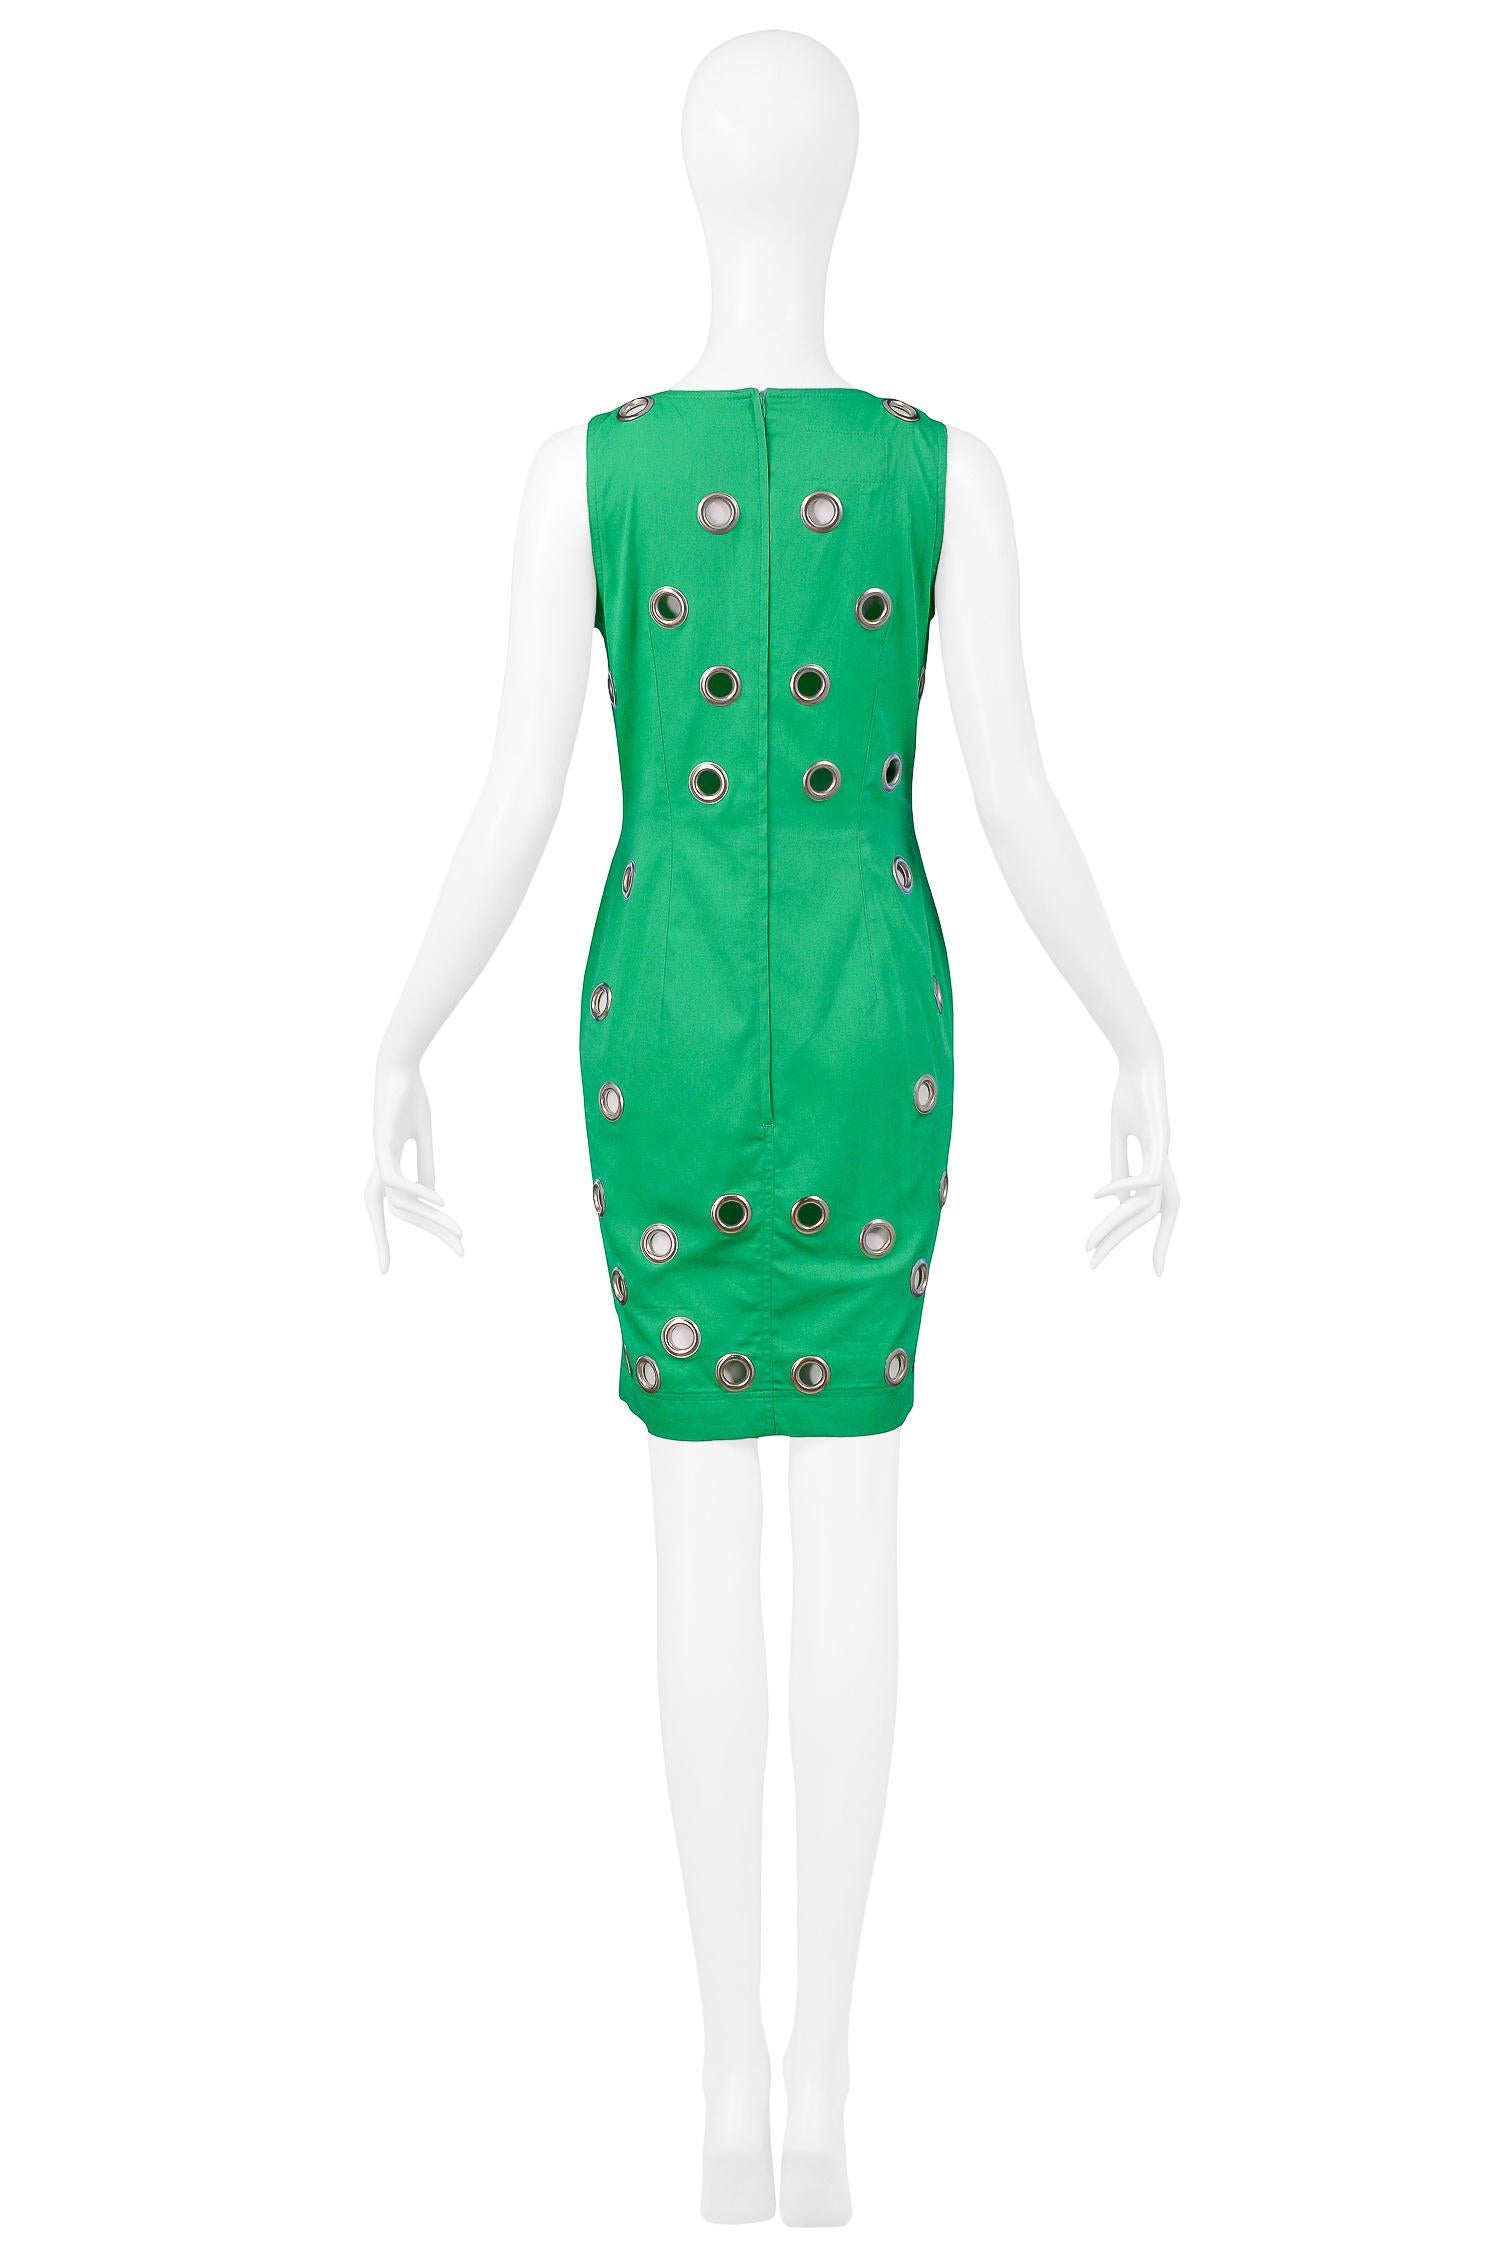 Vintage Alberta Ferretti Green Sleeveless Grommet Shift Dress In Good Condition For Sale In Los Angeles, CA